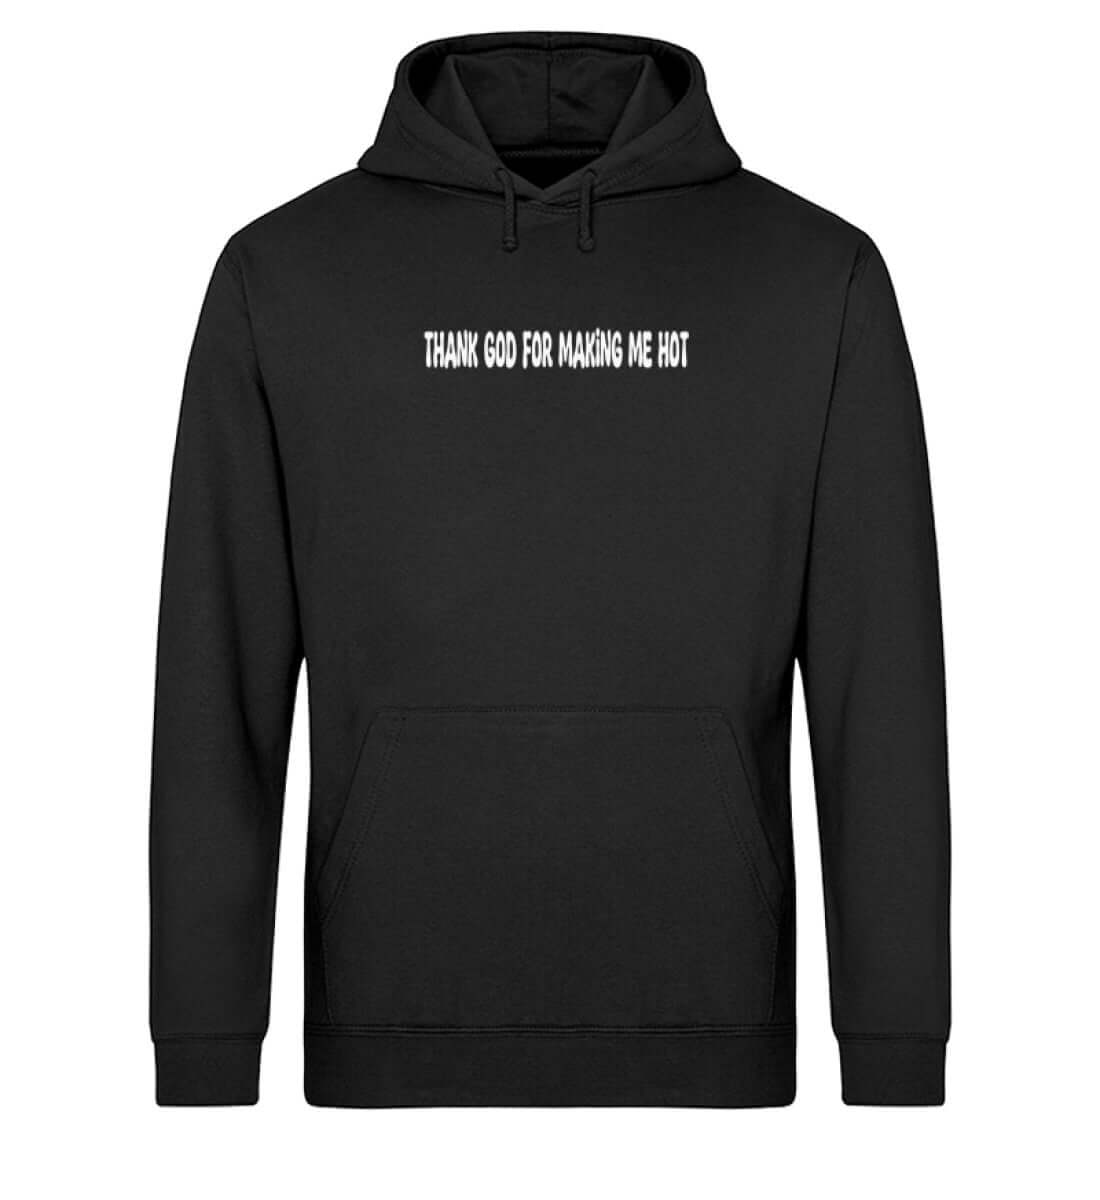 'THANK GOD FOR MAKING ME HOT` HOODIE - GODVIBES